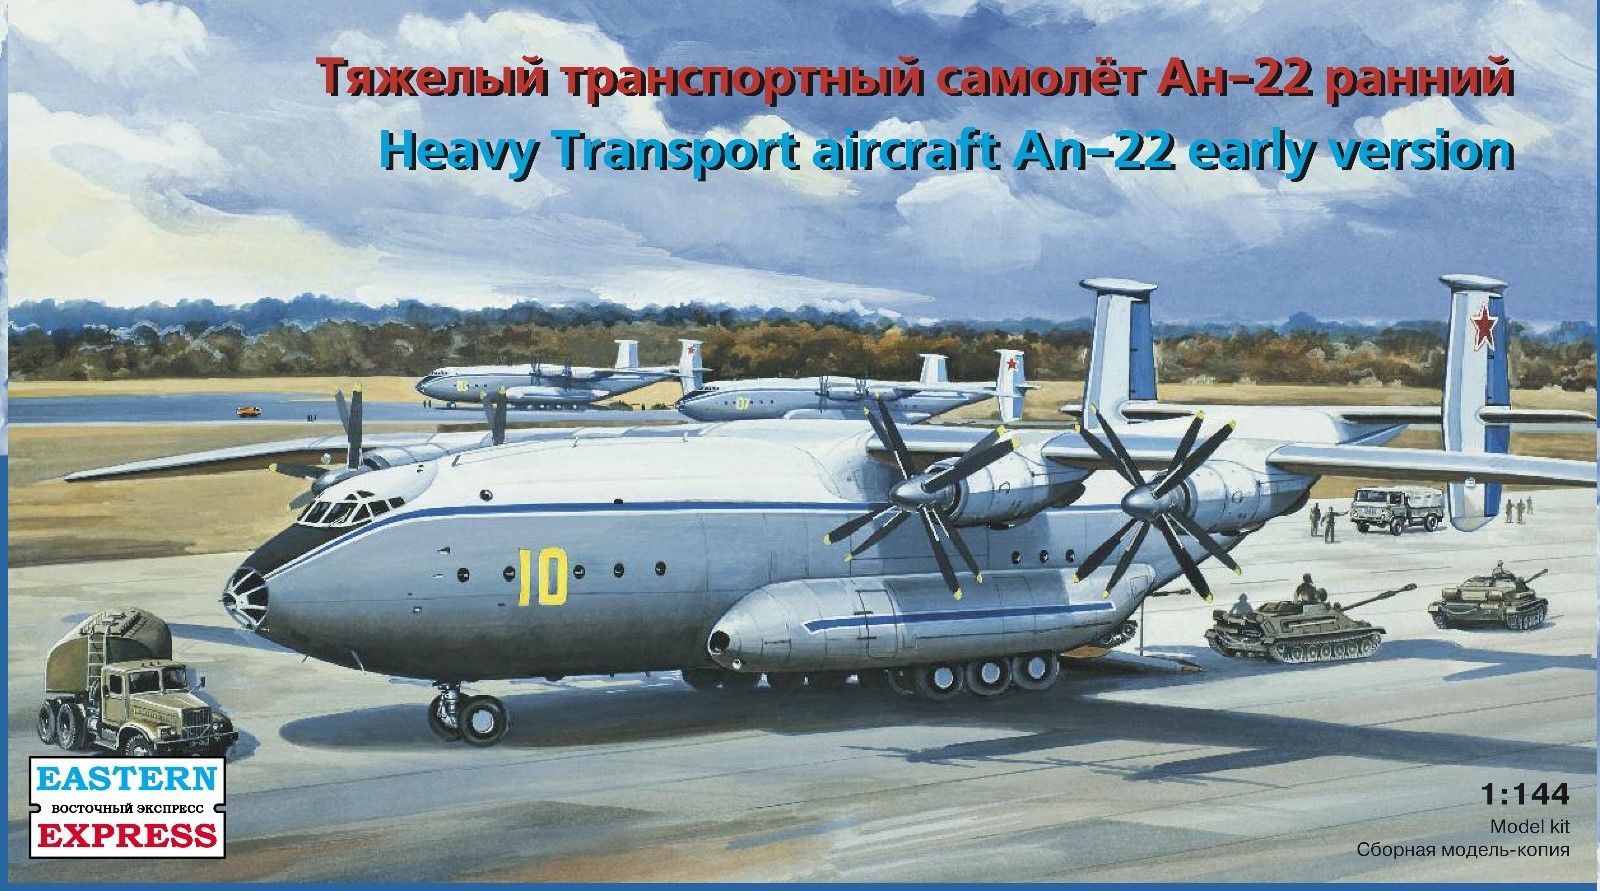 Heavy Transport aircraft An-22 Early version